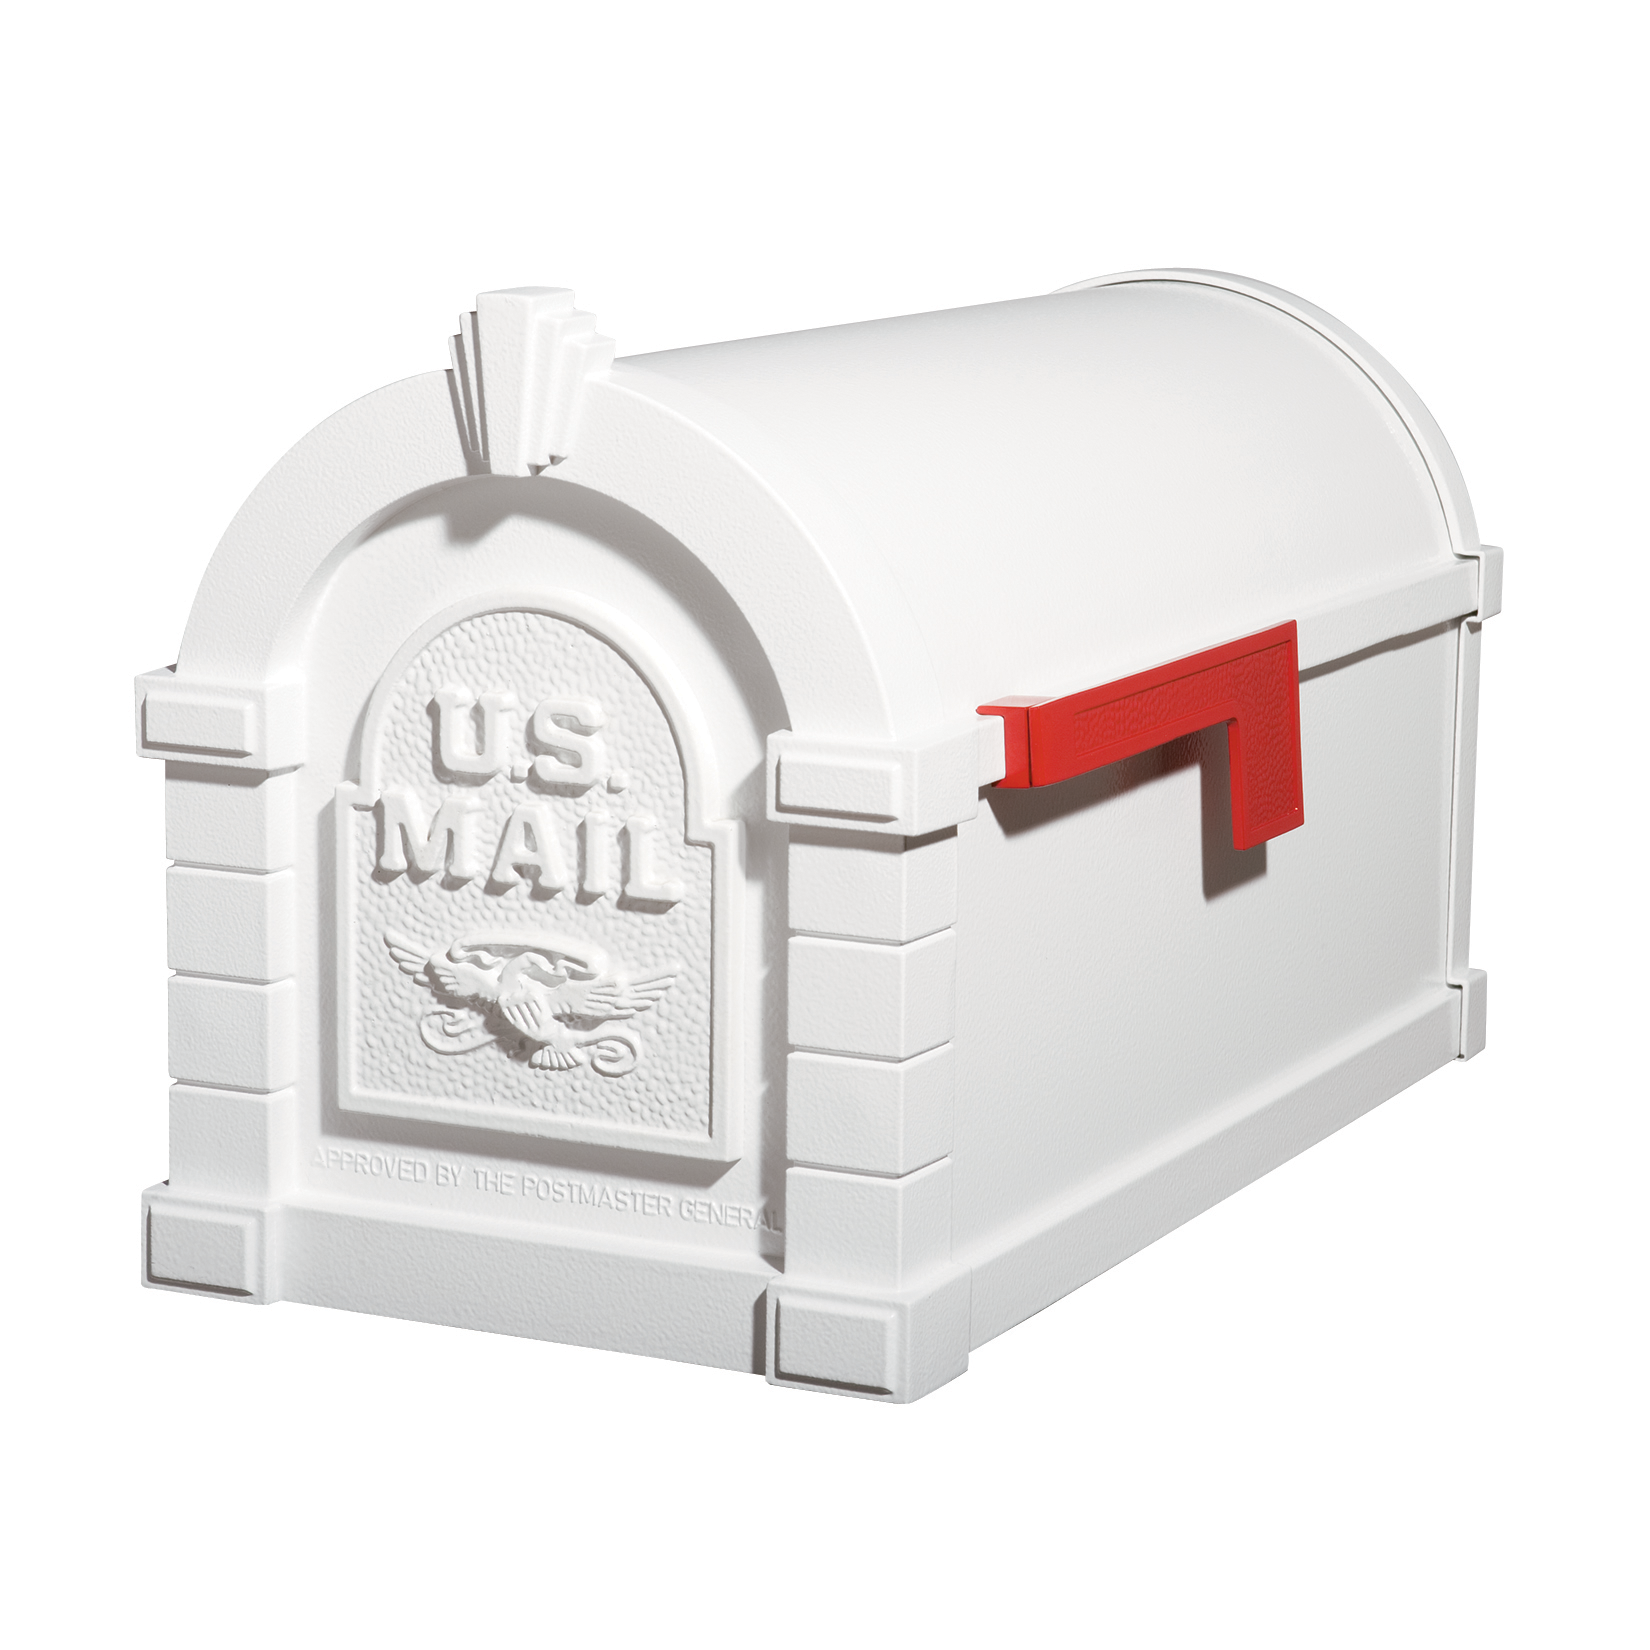 Gaines Eagle Keystone Mailboxes - All White